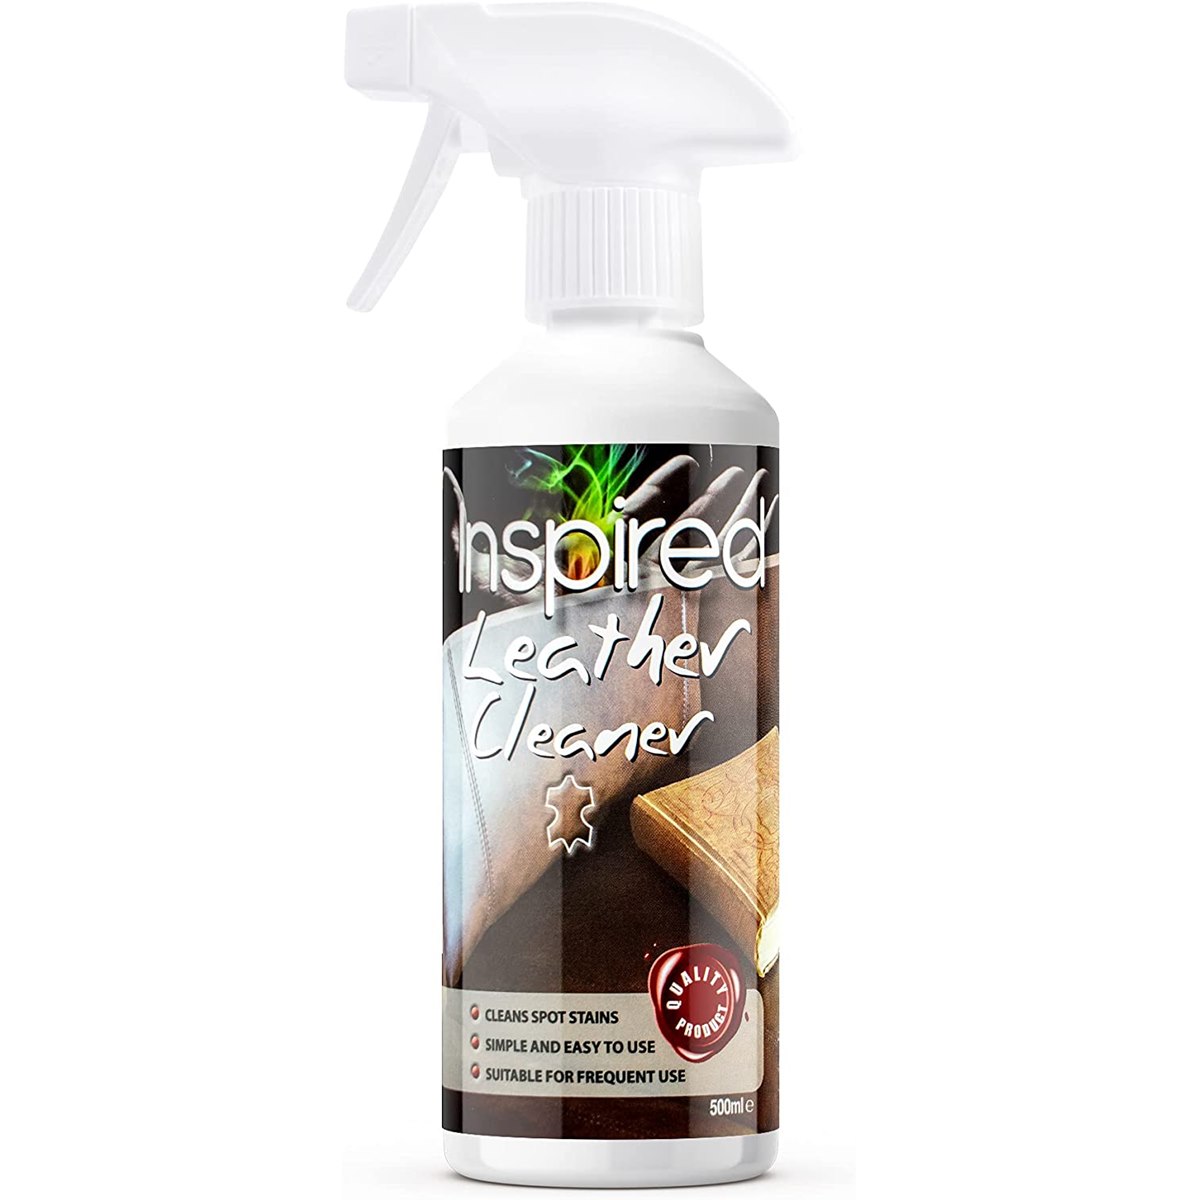 Inspired Powerful Leather Cleaner Spray 500ml